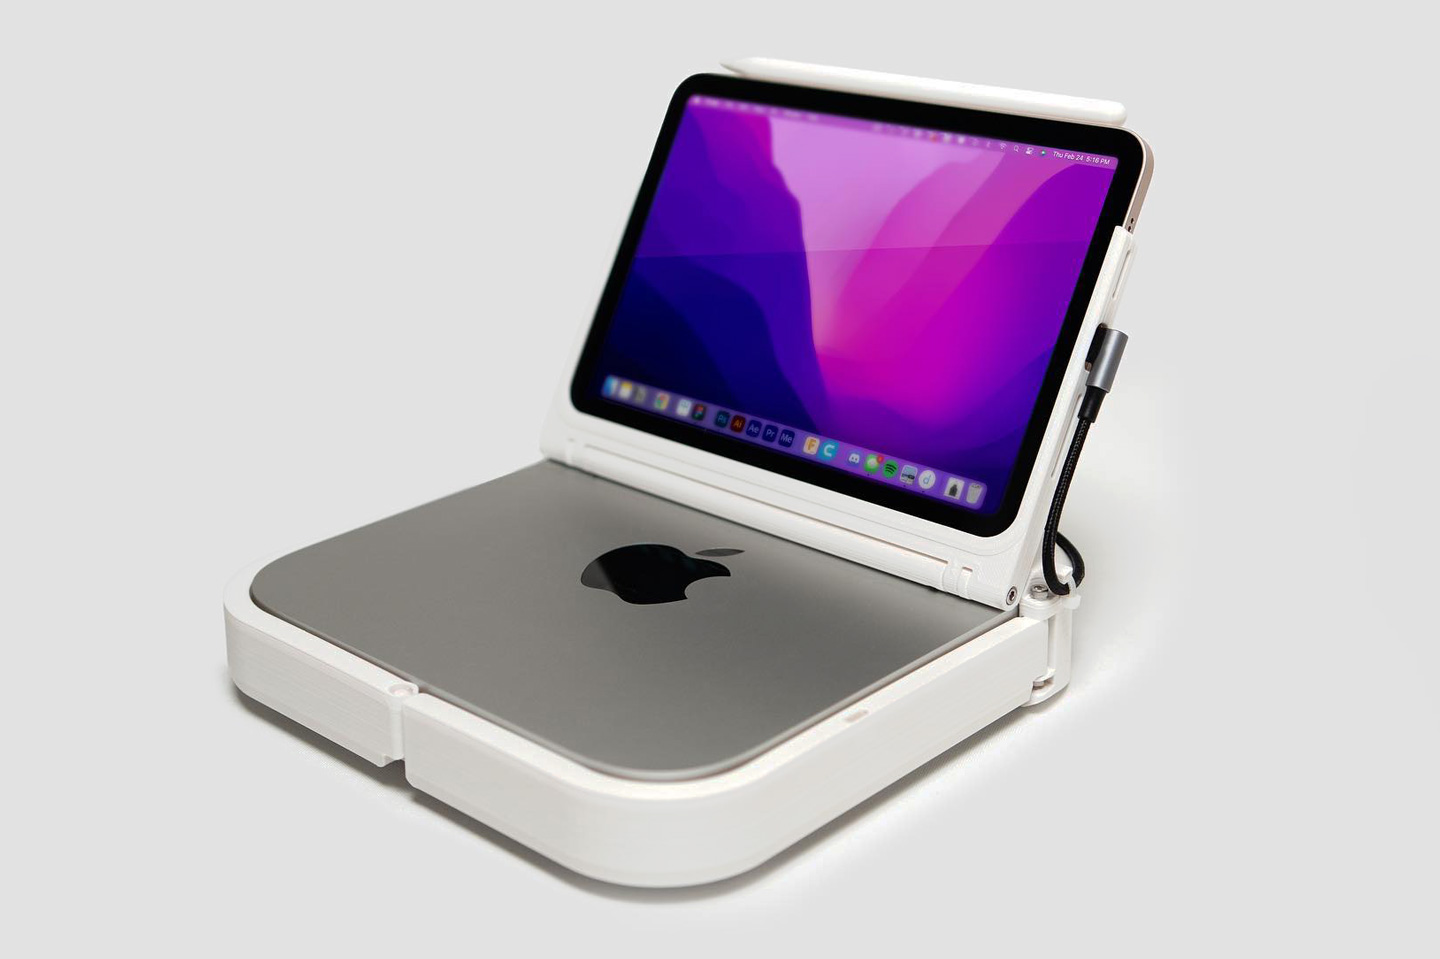 #The most powerful M1 MacBook that Apple never built…